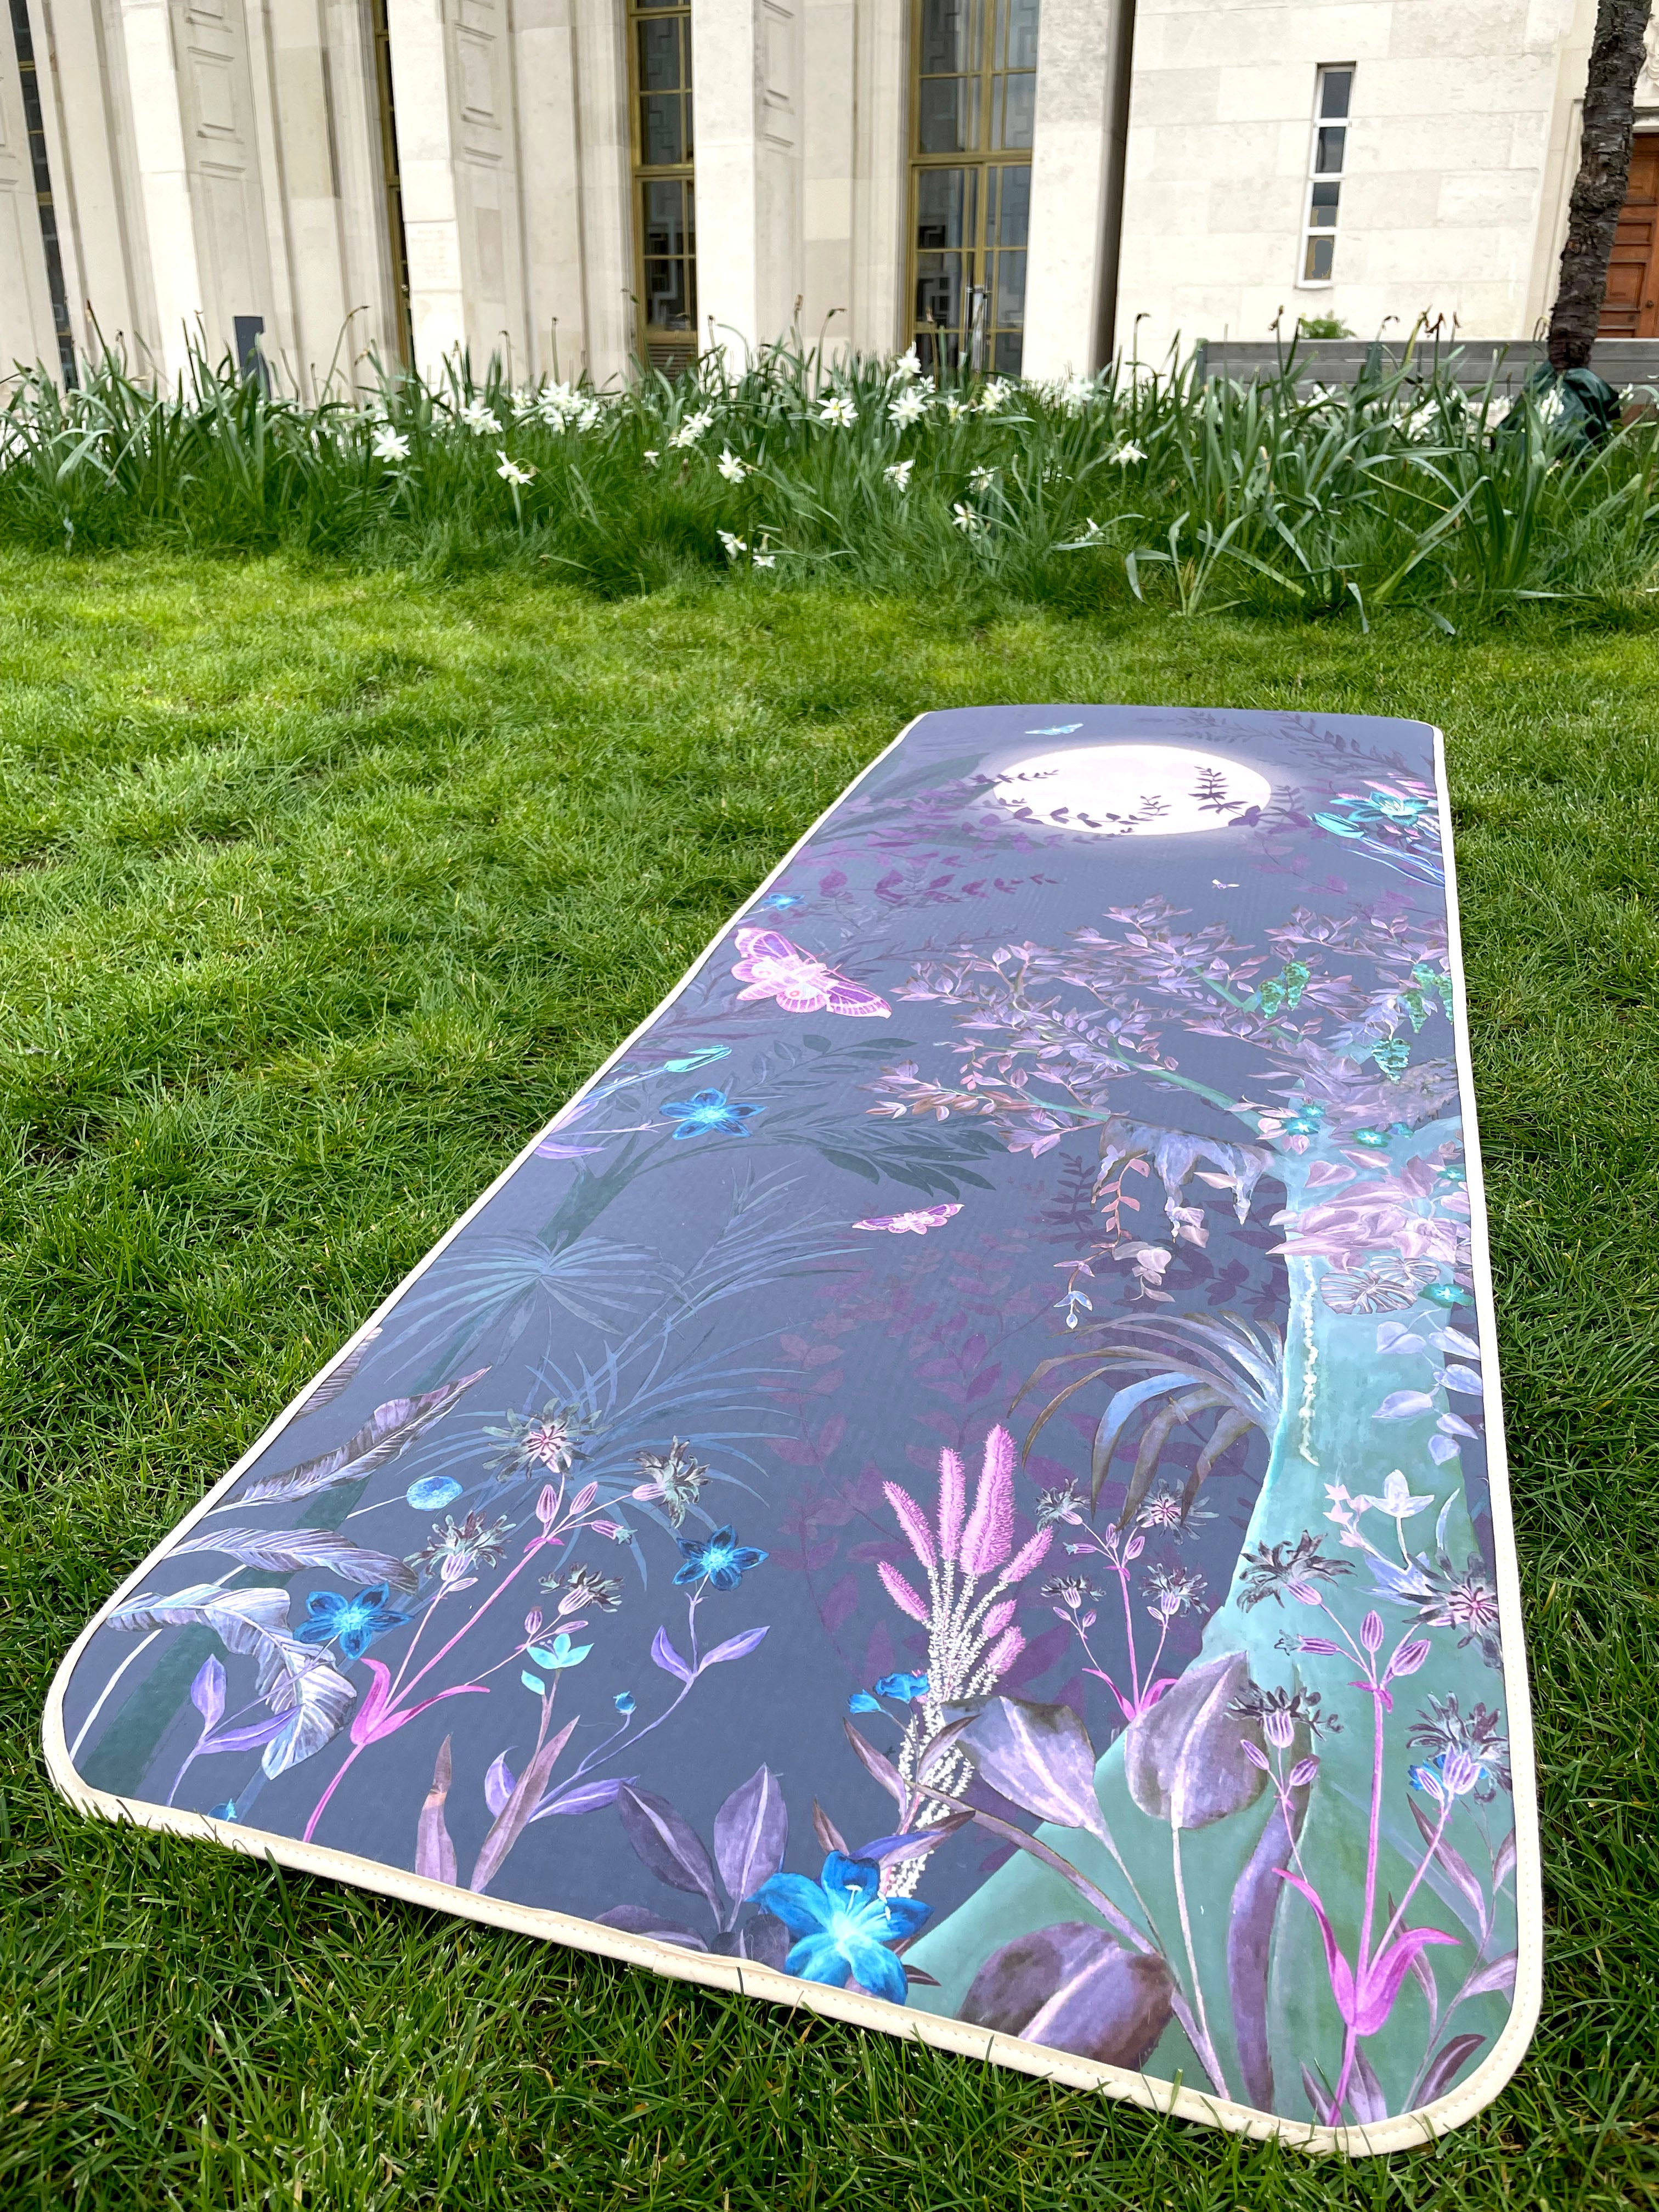 The 'Enchanted forest' print yoga mat for pilates, yoga and